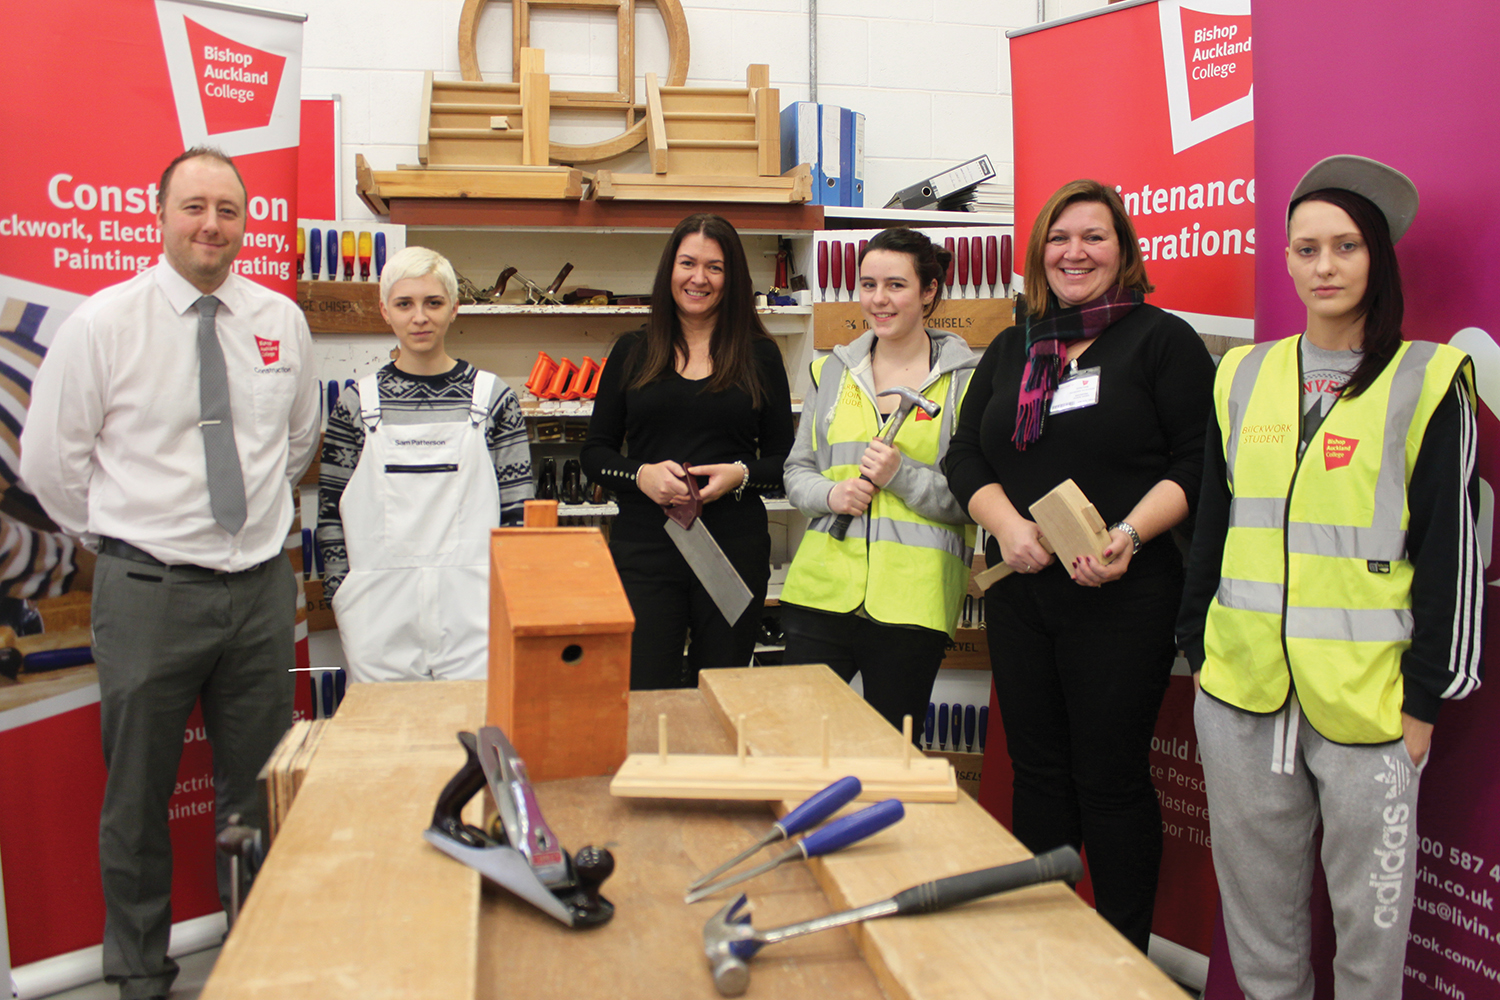 Pioneering Partnership Promotes Construction Careers For Women